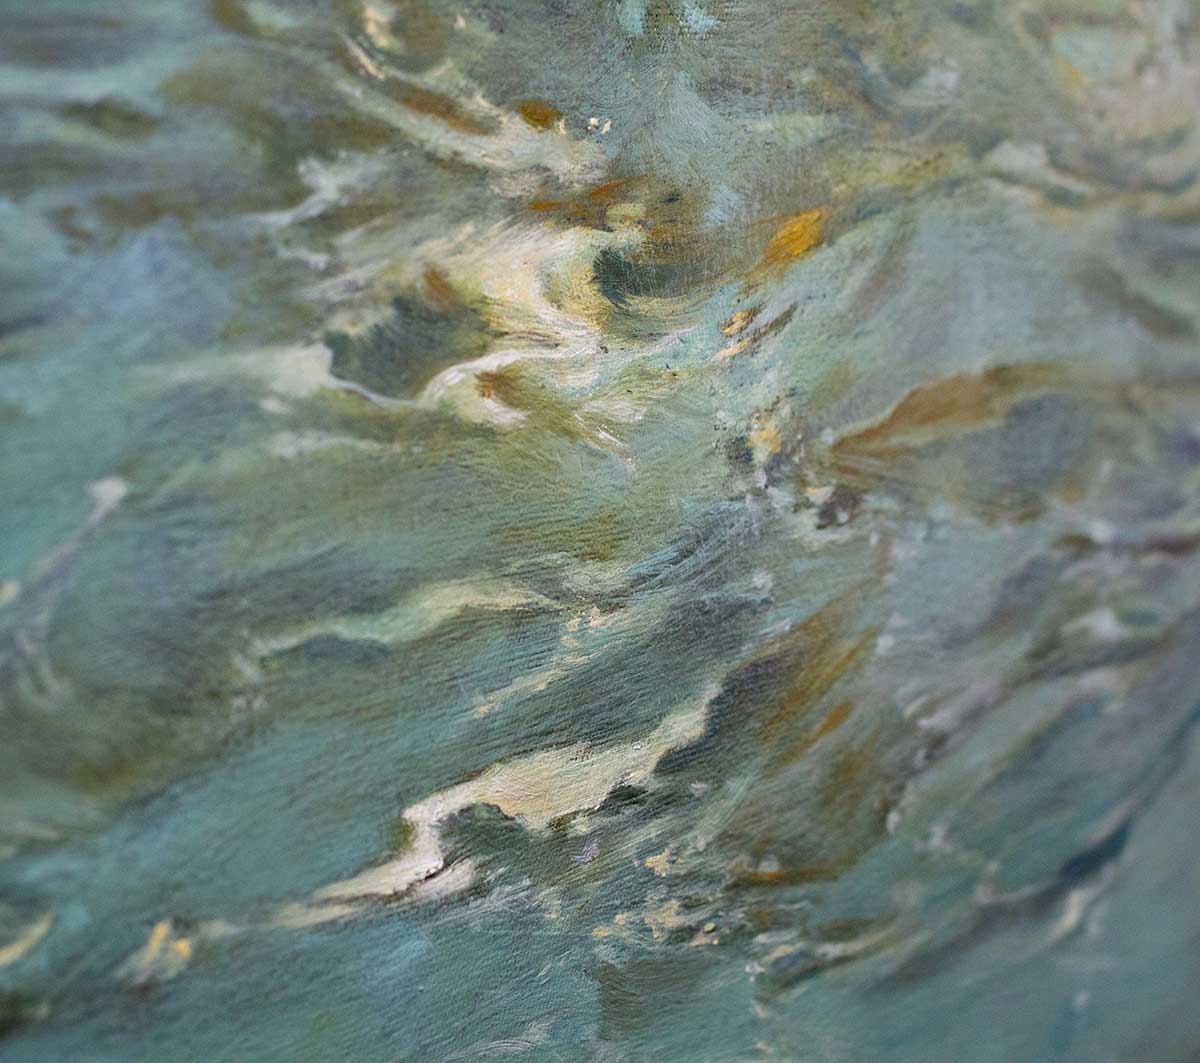 oil painting of the ripples on the surface of a turquoise sea